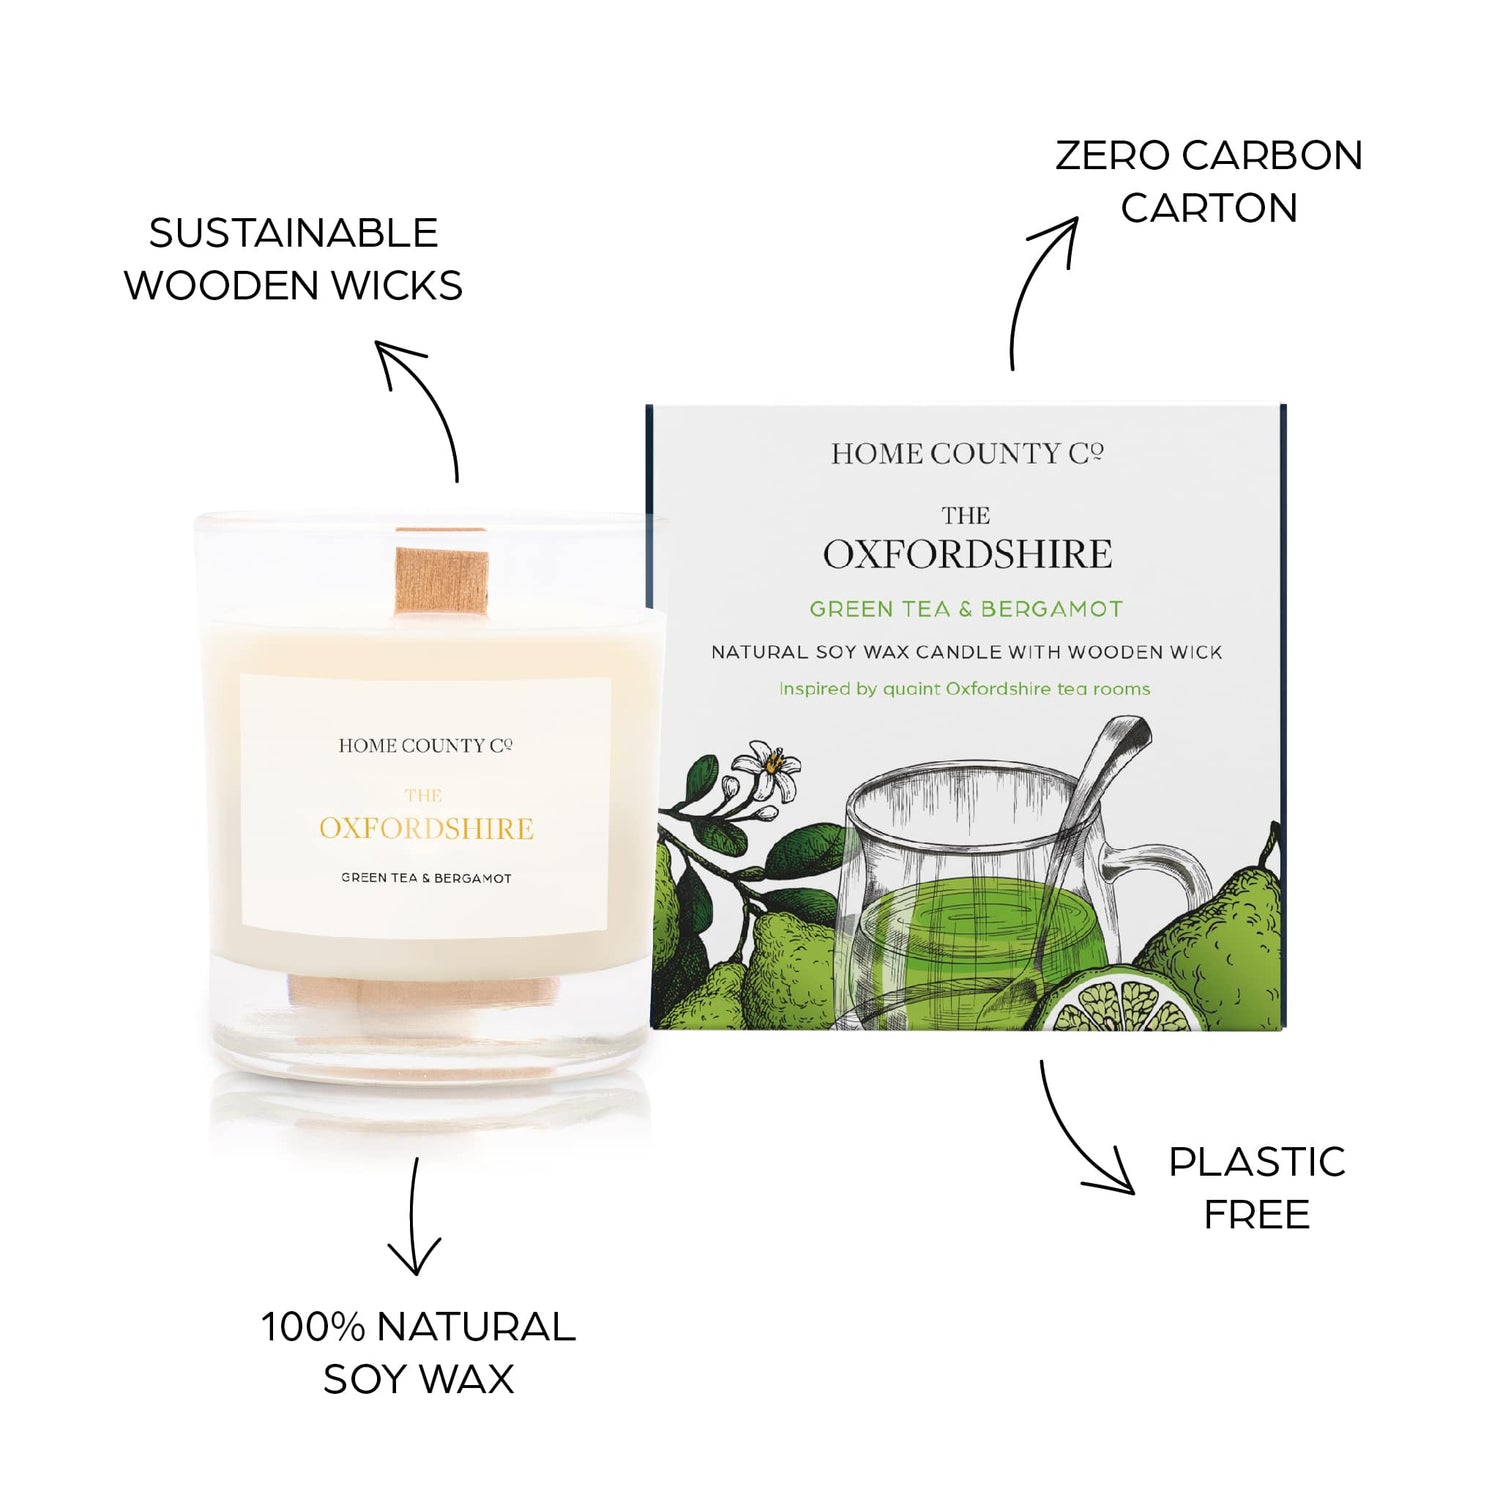 Sustainable candle credentials are shown around the green tea scented candle image - sustainable wooden wicks, zero carbon carton, 100% natural soy wax, plastic free